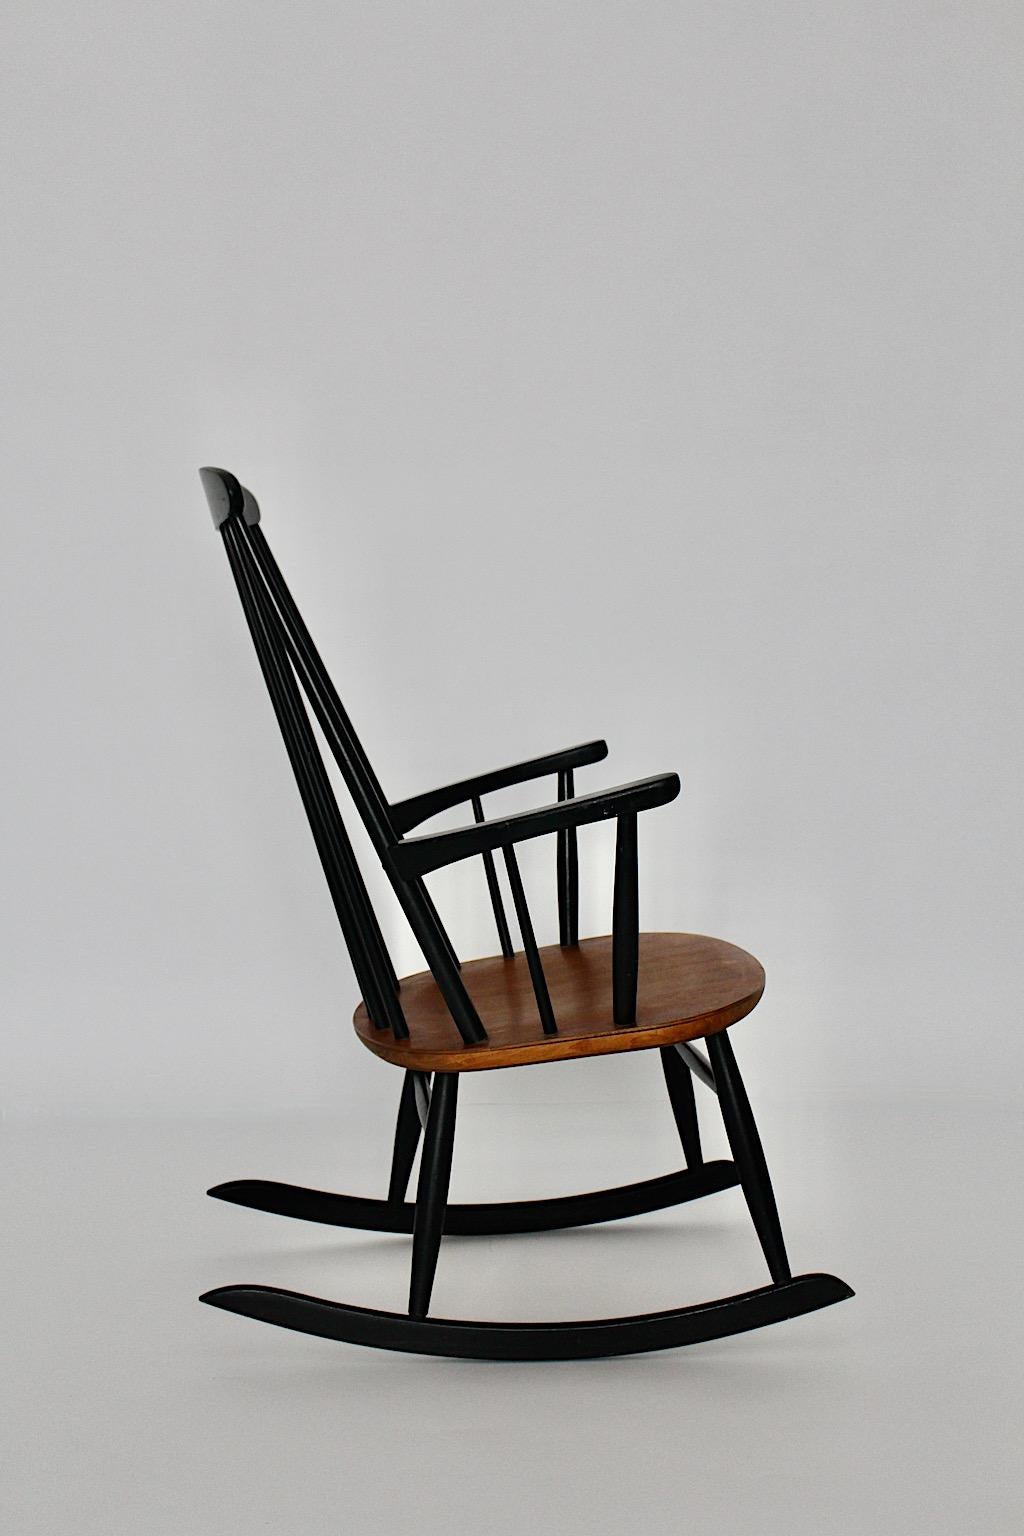 Scandinavian Modern vintage rocking chair by Ilmari Tapiovaara for Asko 1950s, Finland.
A wonderful rocking chair from black lacquered beech and natural brown teak with comfortable armrests.
Ideal for a fireplace as a cosy chair for relaxing.